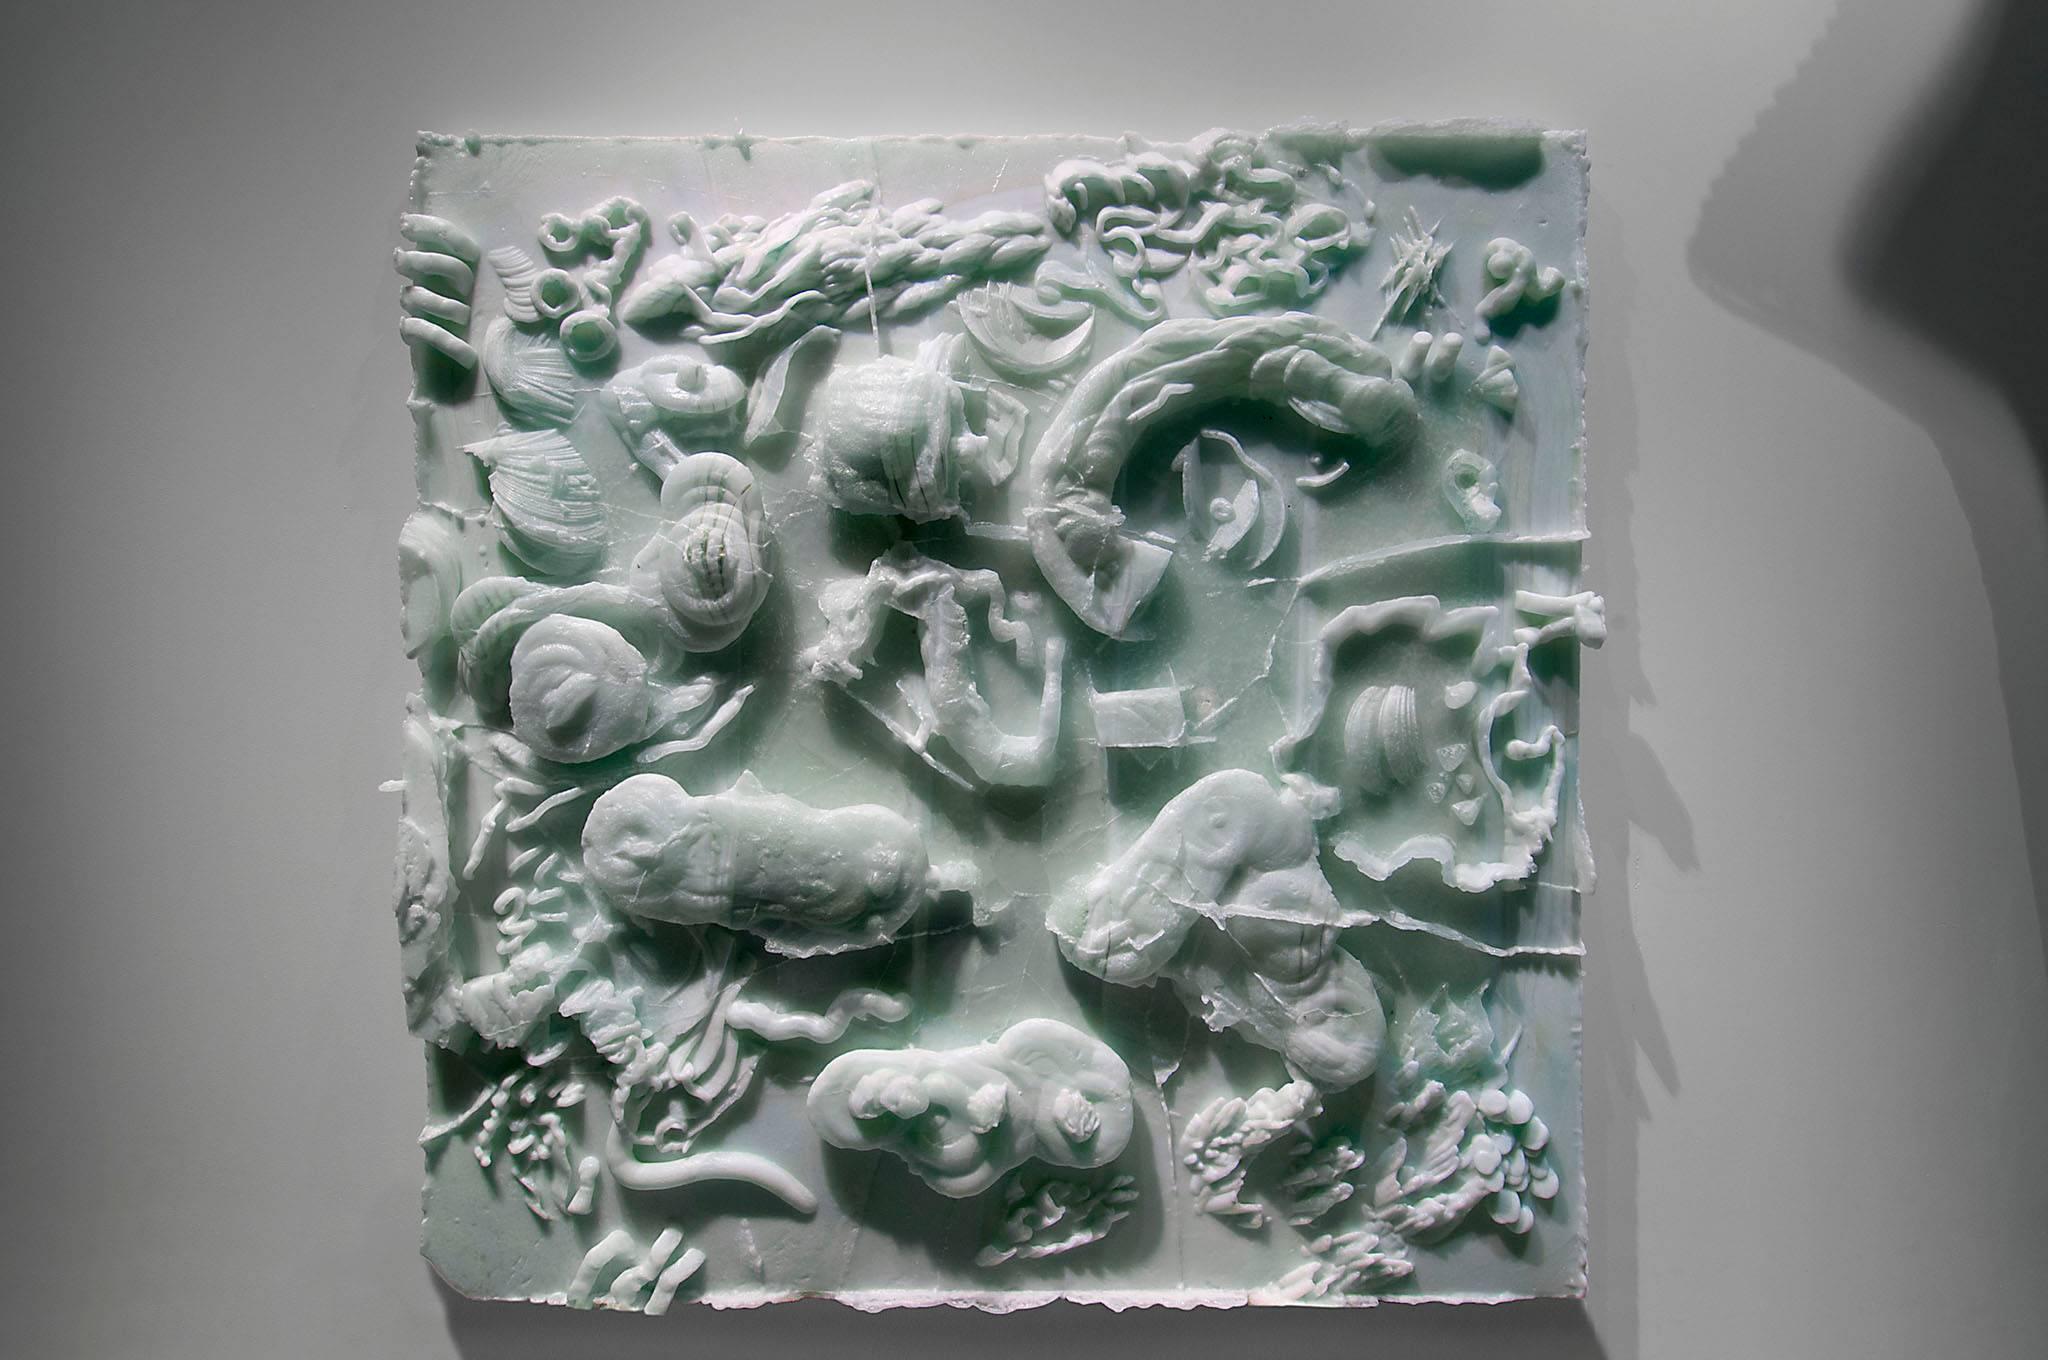 Carved Cast 3 is a unique cast glass relief sculpture by Danny Lane

A three-dimensional drawing by Danny Lane with deep undercuts of archaeological forms found at the bottom of the sea. This cast glass has a jade like quality as the vitreous